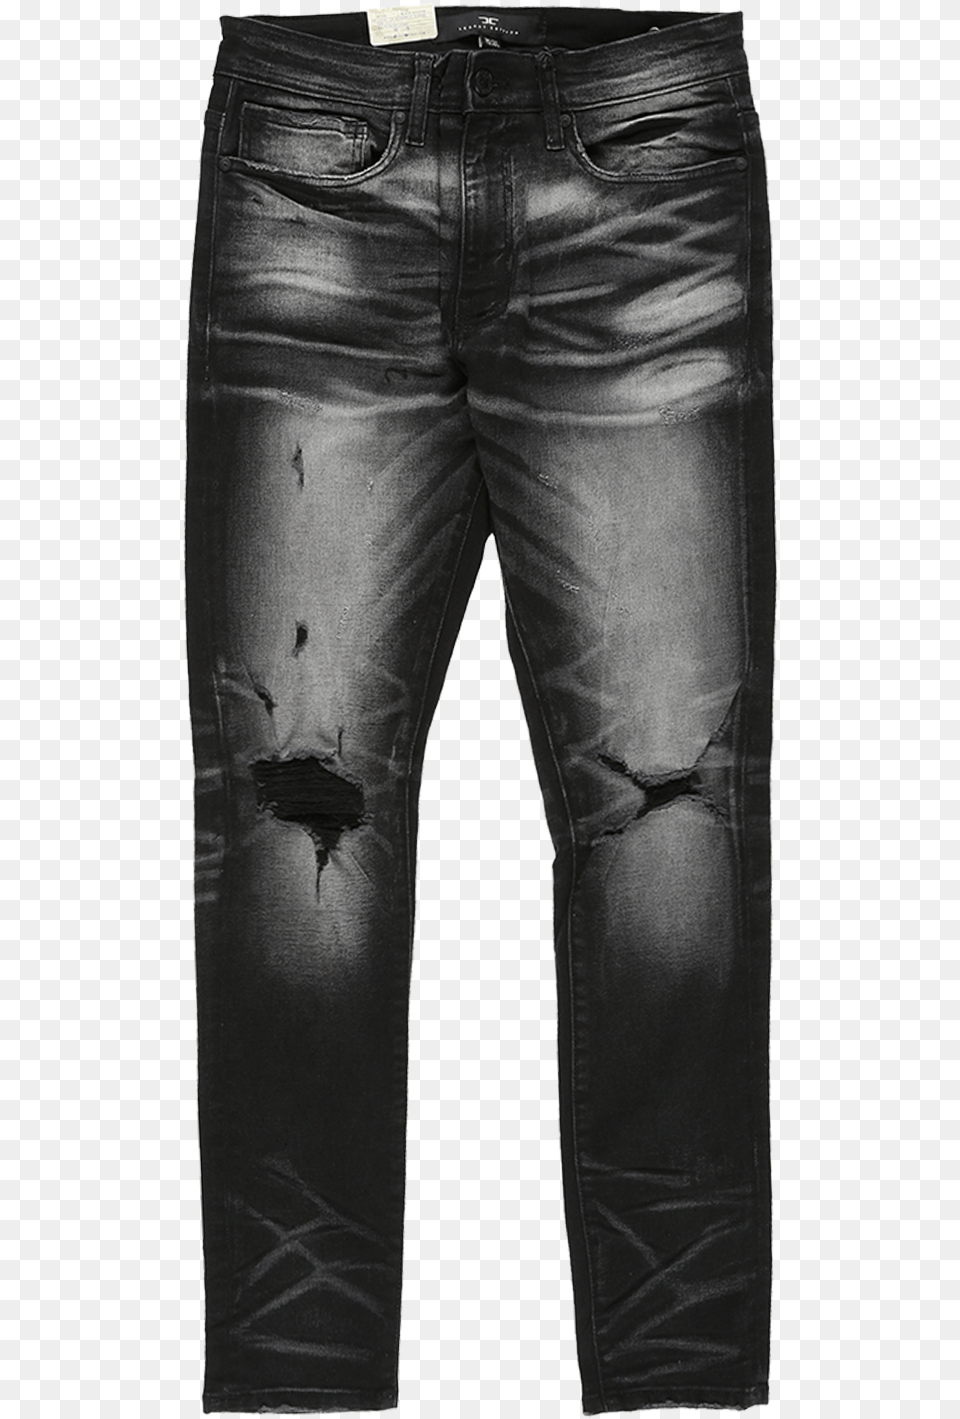 Pocket, Clothing, Jeans, Pants, Stain Free Png Download